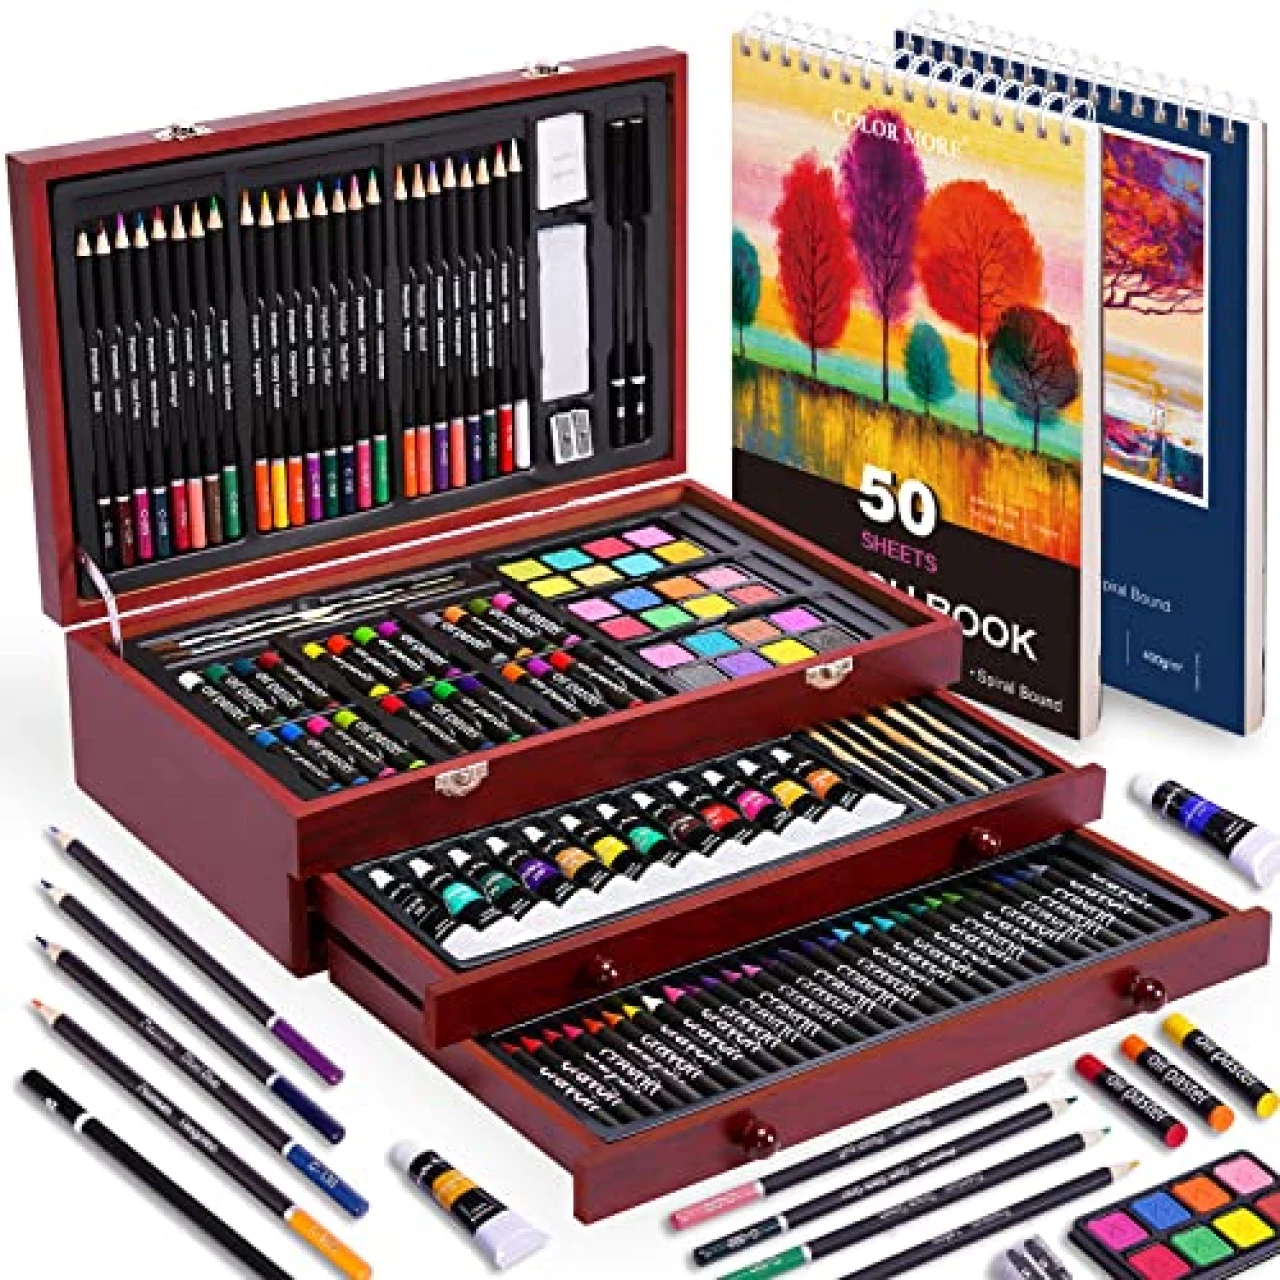 175 Piece Deluxe Art Set with 2 Drawing Pads, Acrylic Paints, Crayons, Colored Pencils, Paint Set in Wooden Case, Professional Art Kit, Art Supplies for Adults, Teens and Artist, Paint Supplies